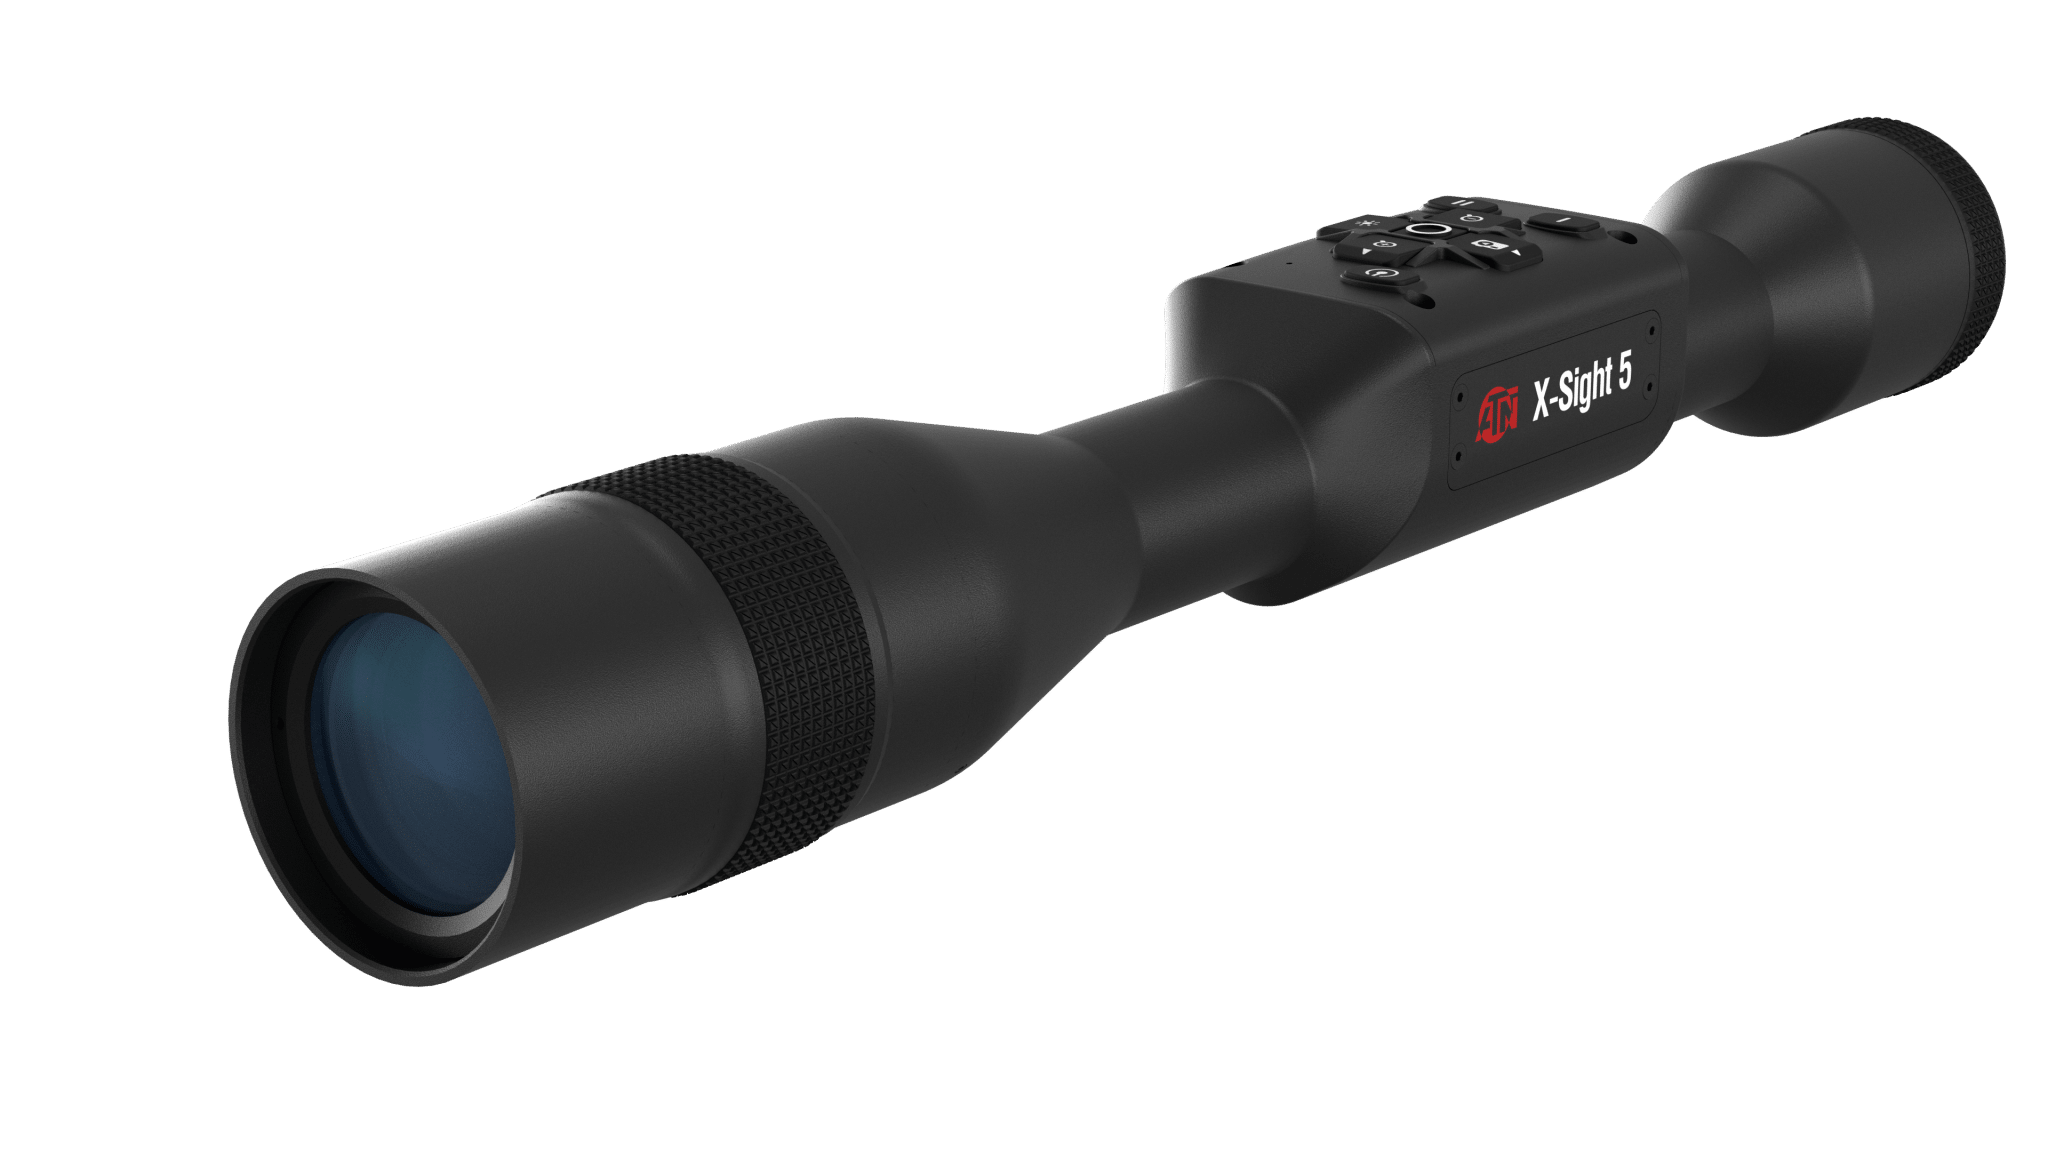 Atn X Sight 5 5 25x Day And Night Vision Rifle Scope